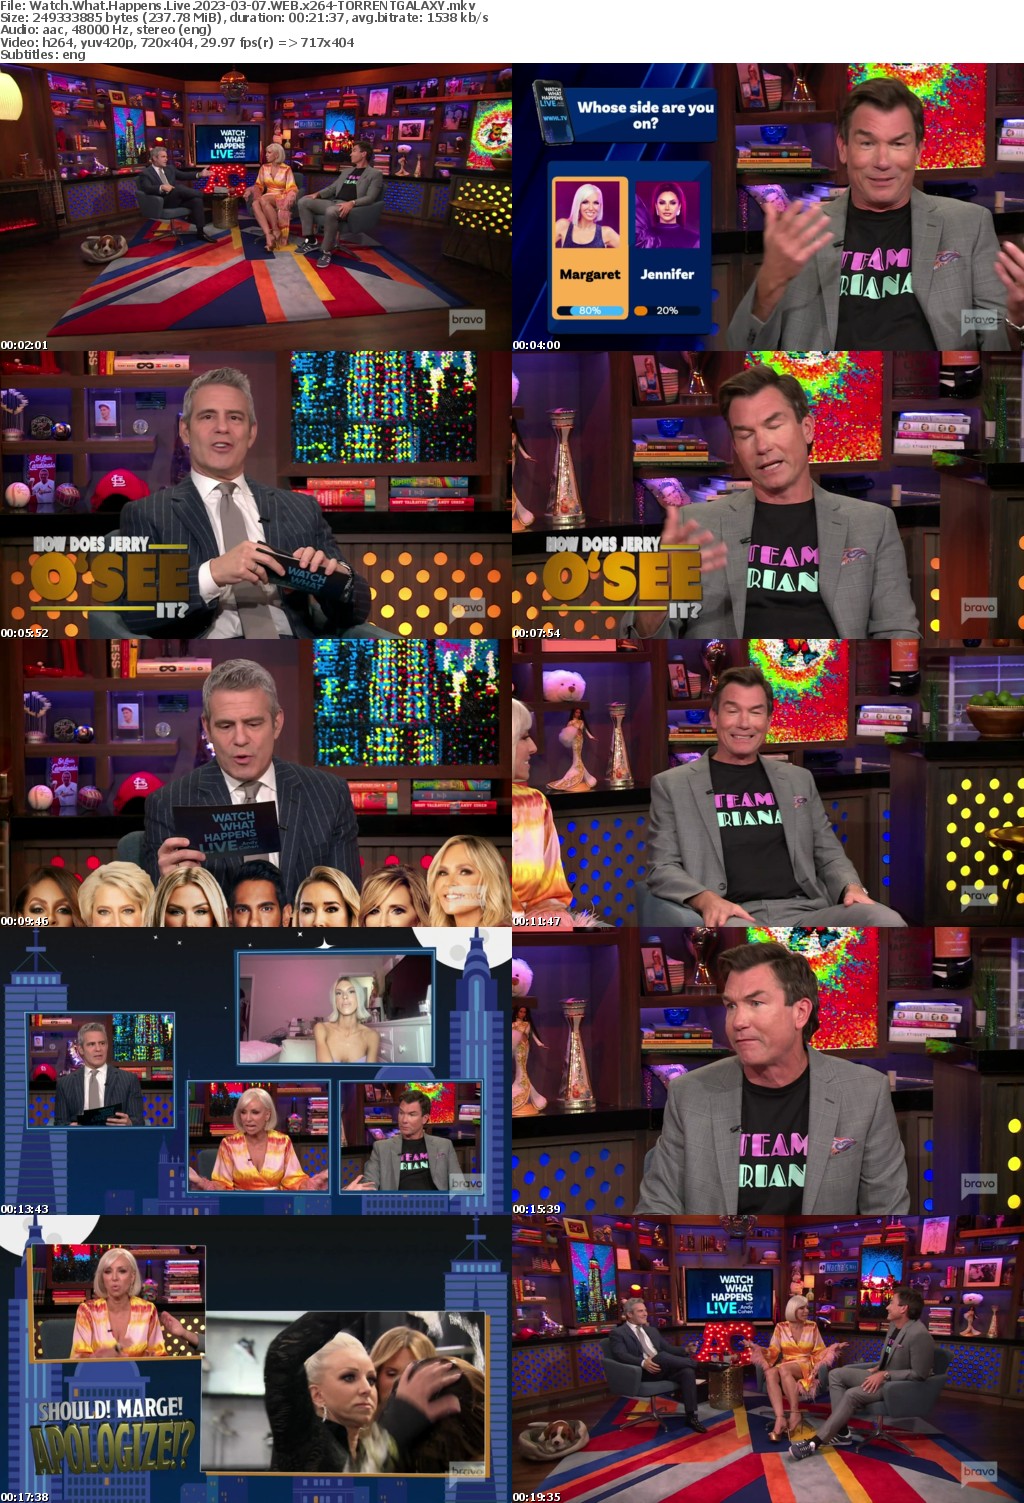 Watch What Happens Live 2023-03-07 WEB x264-GALAXY